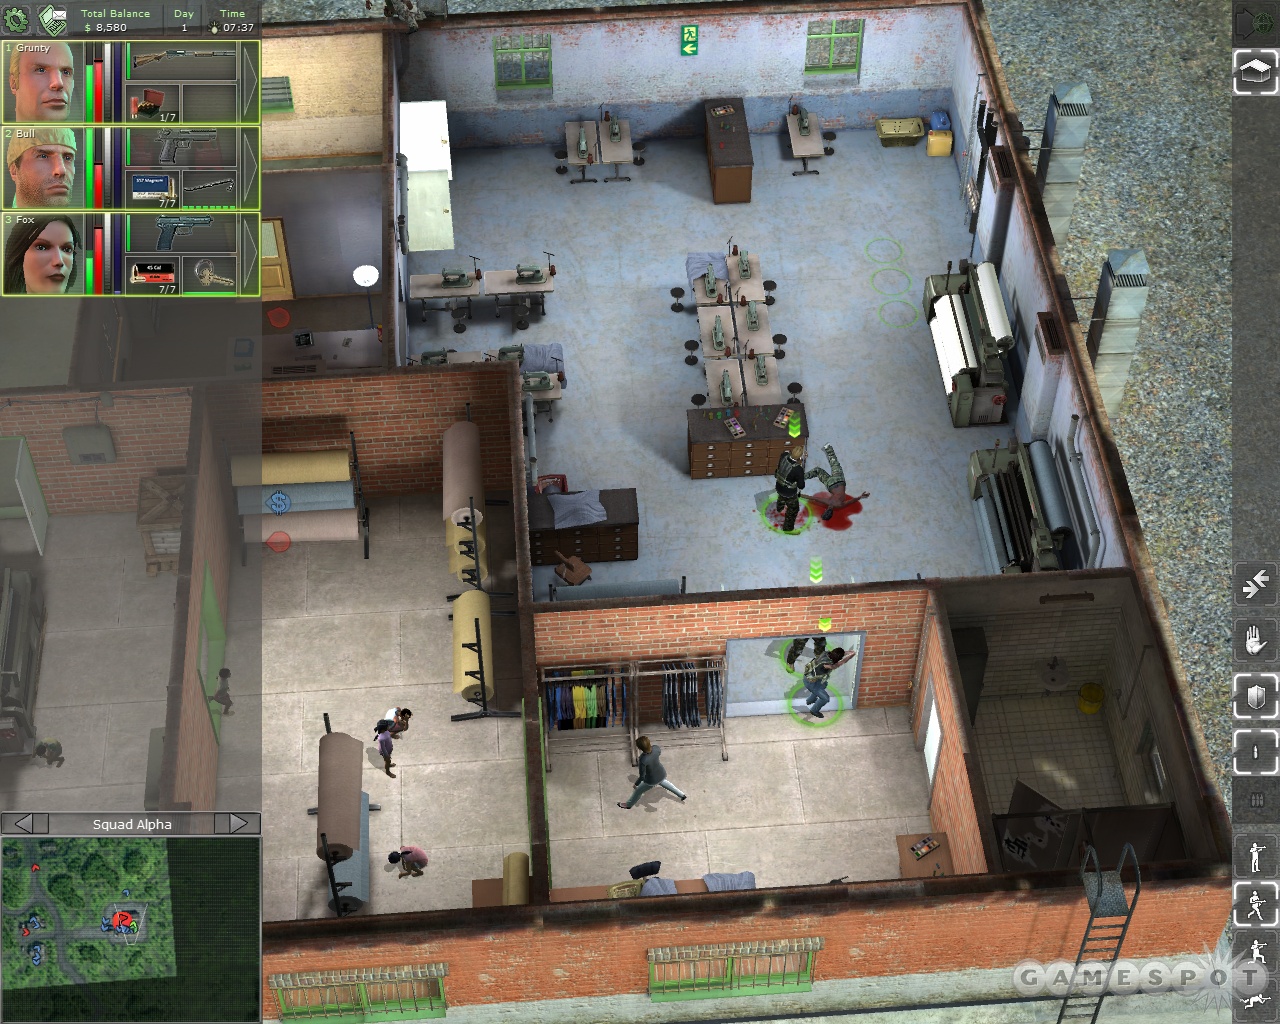 This game is so aggravating, you'll want to make like these civilians and cower in the corner.